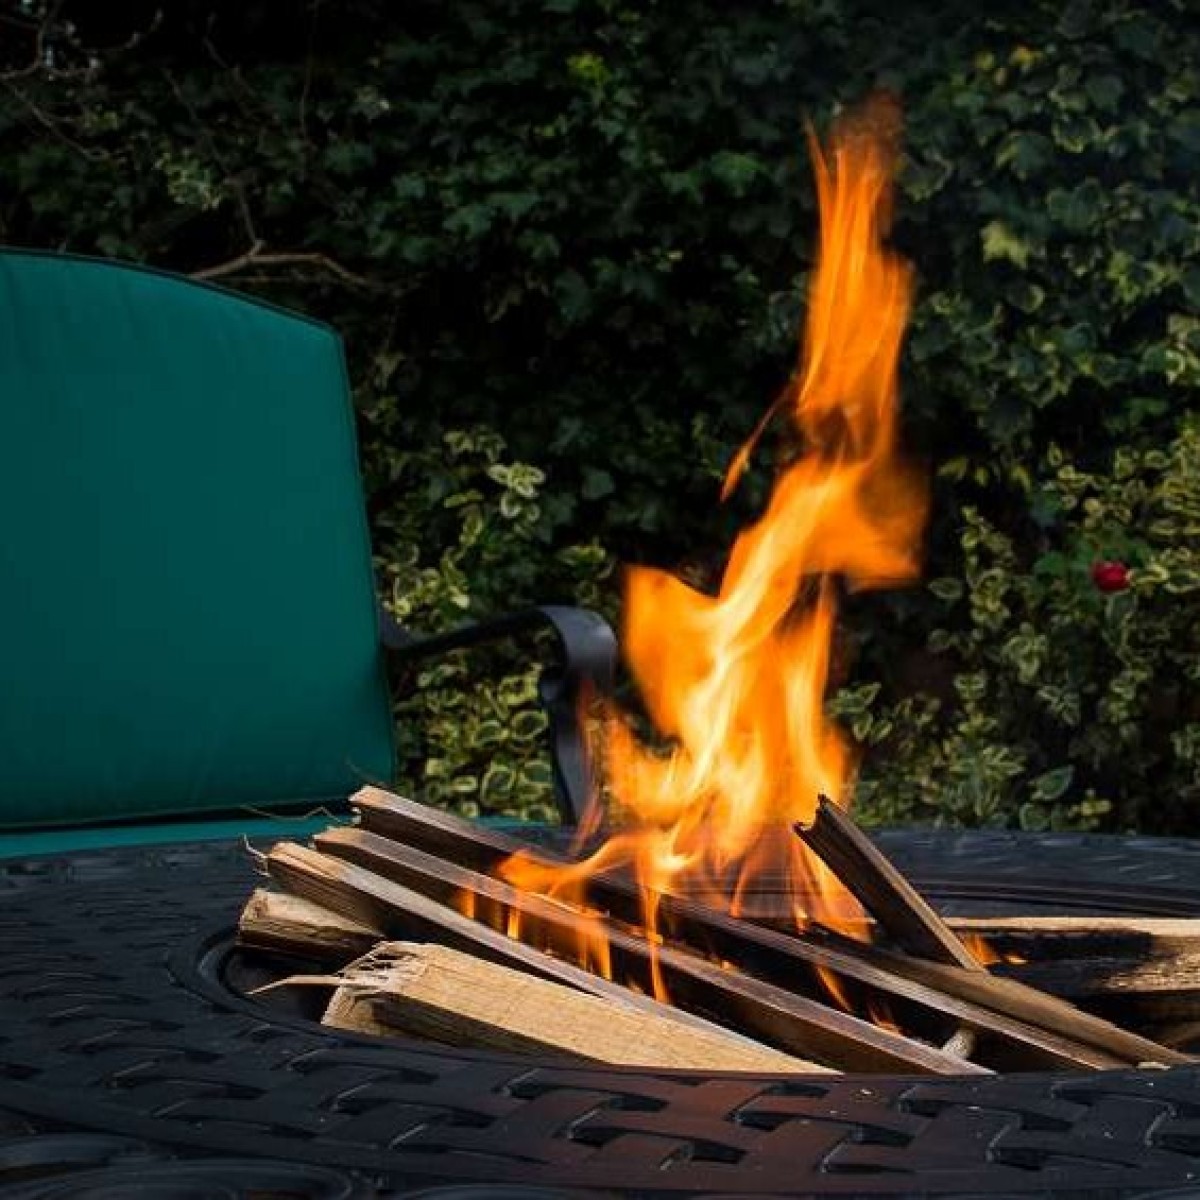 Two seater firepit set